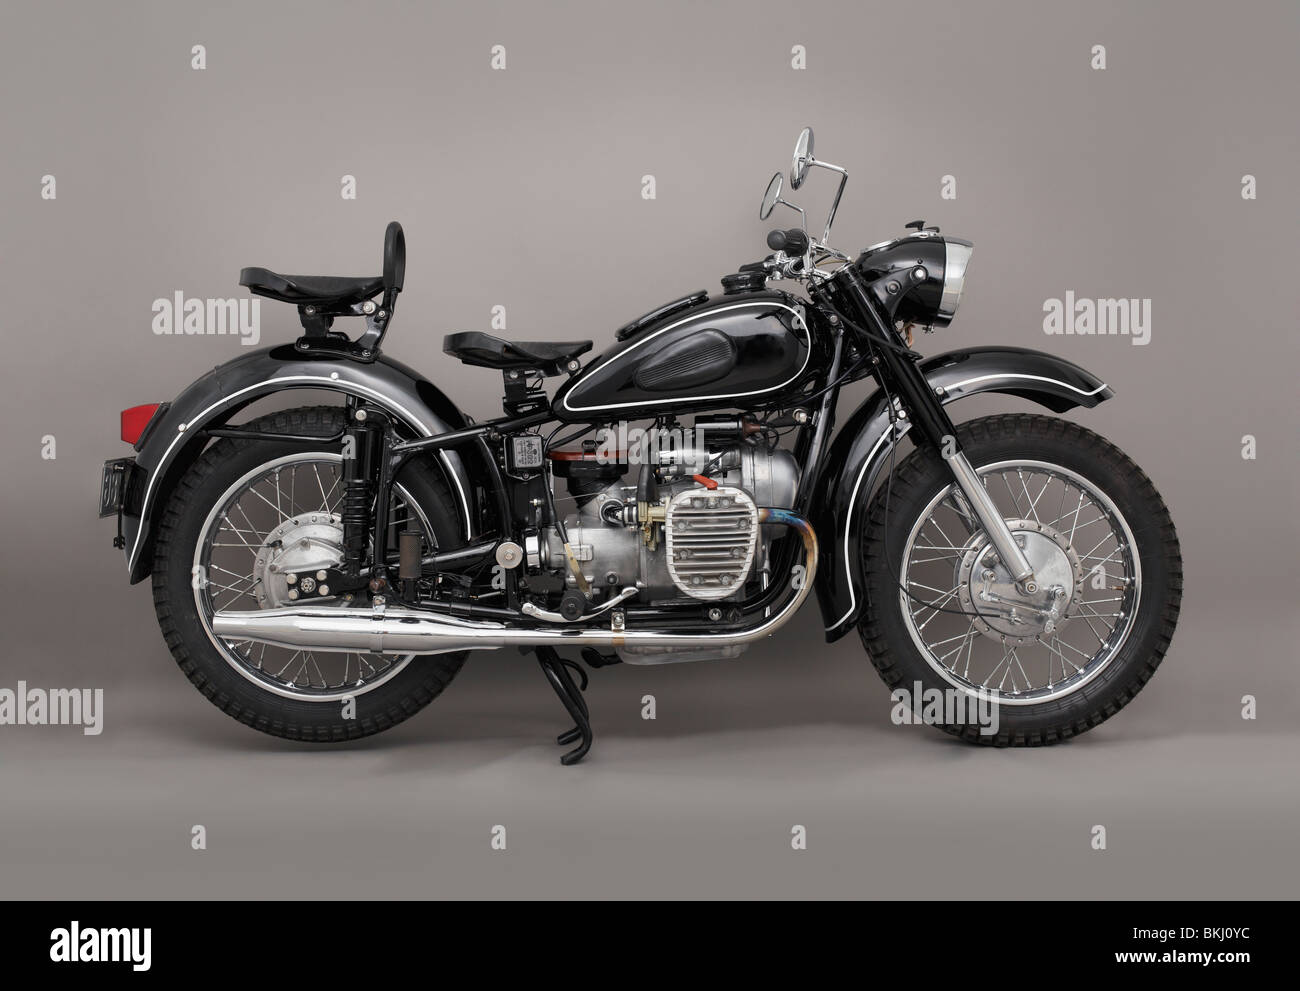 Dnepr K 750 M motorcycle from year 1968 in studio setting. Stock Photo